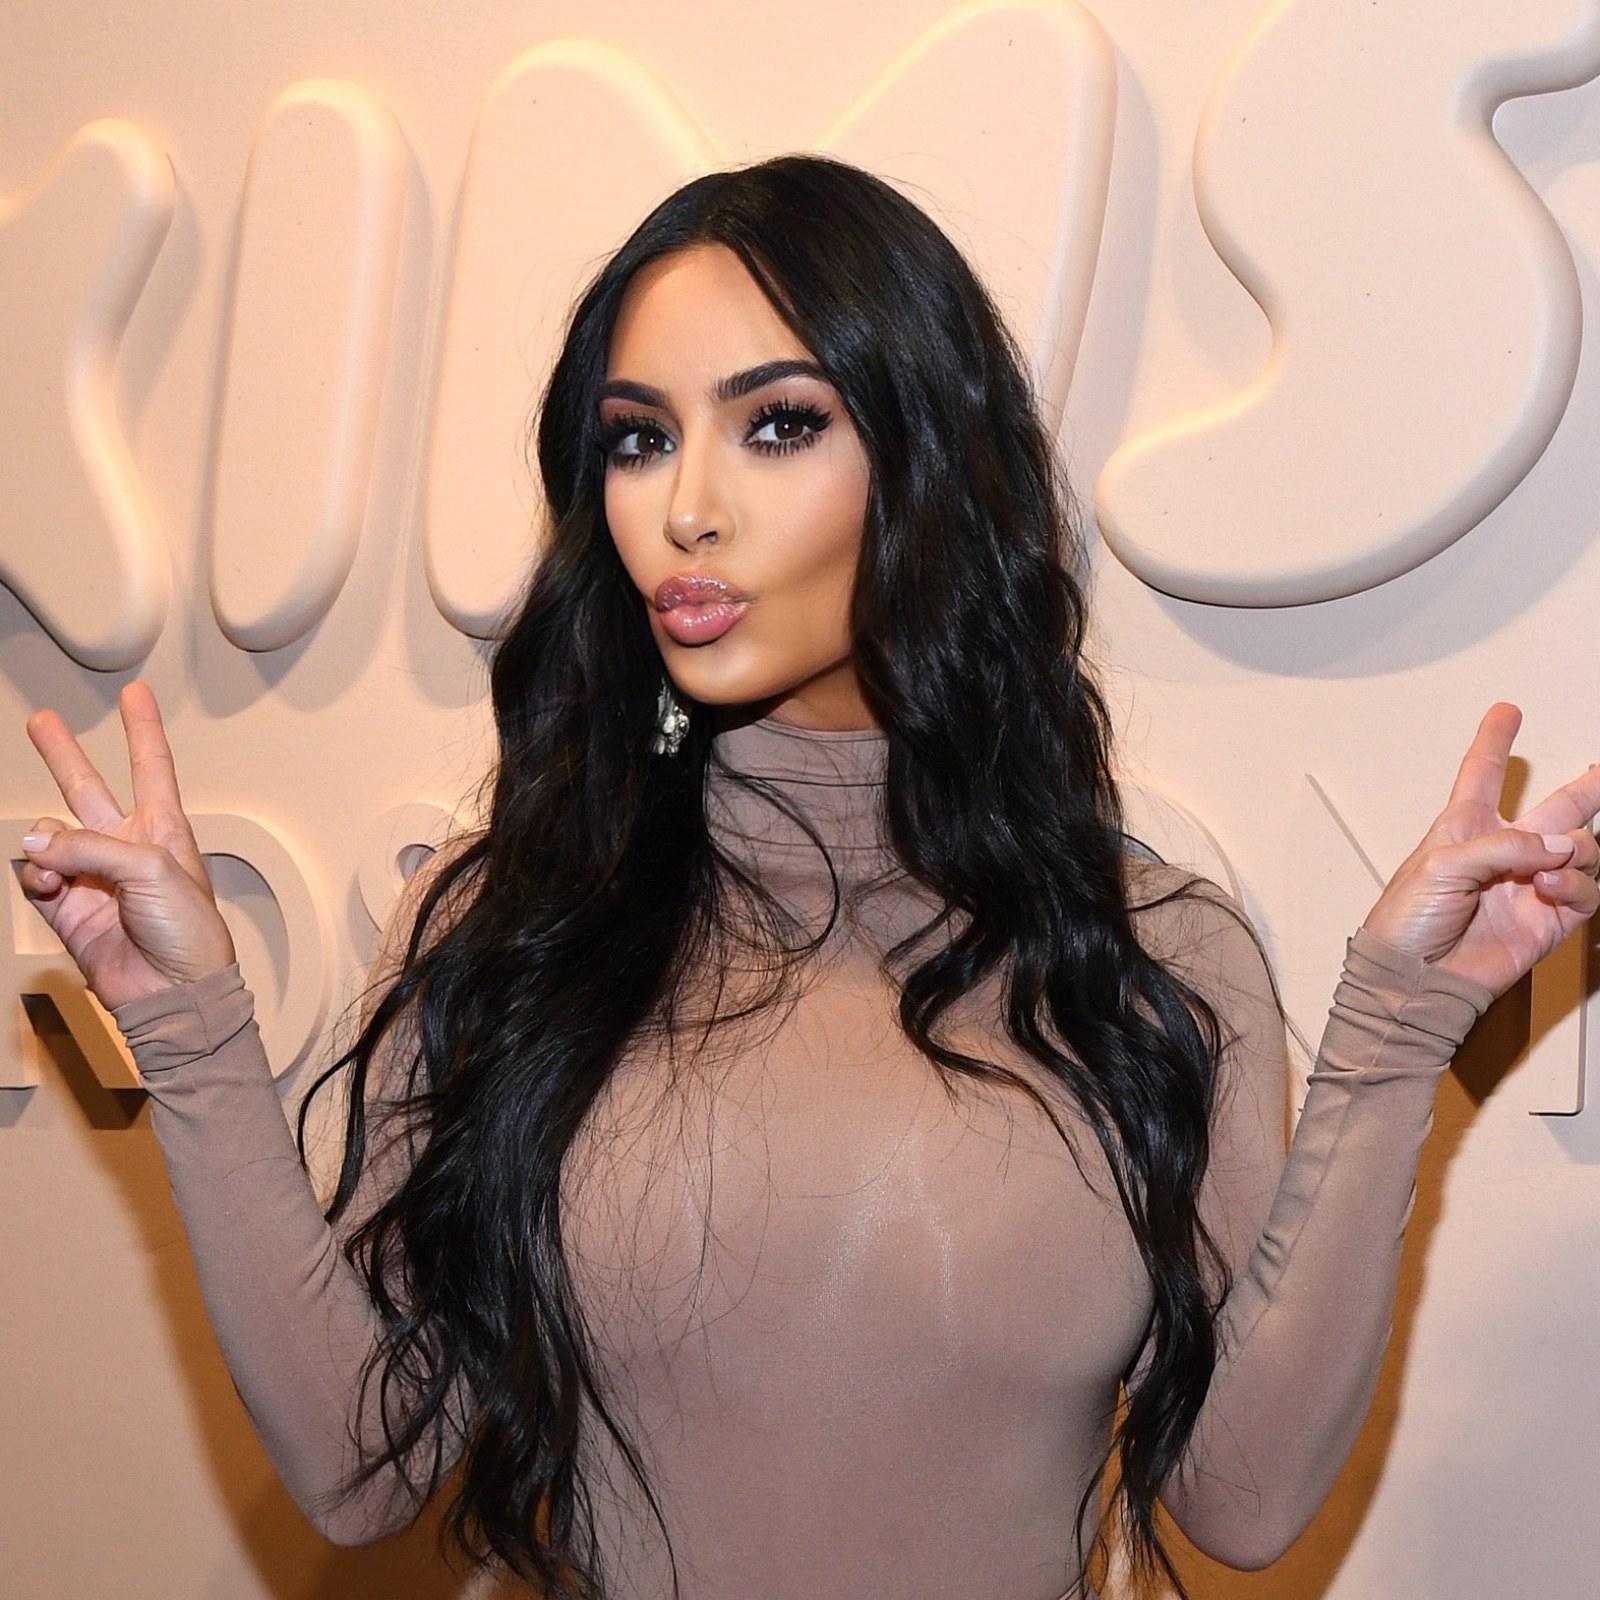 I tried Kim Kardashian's Skims line and here's what I thought